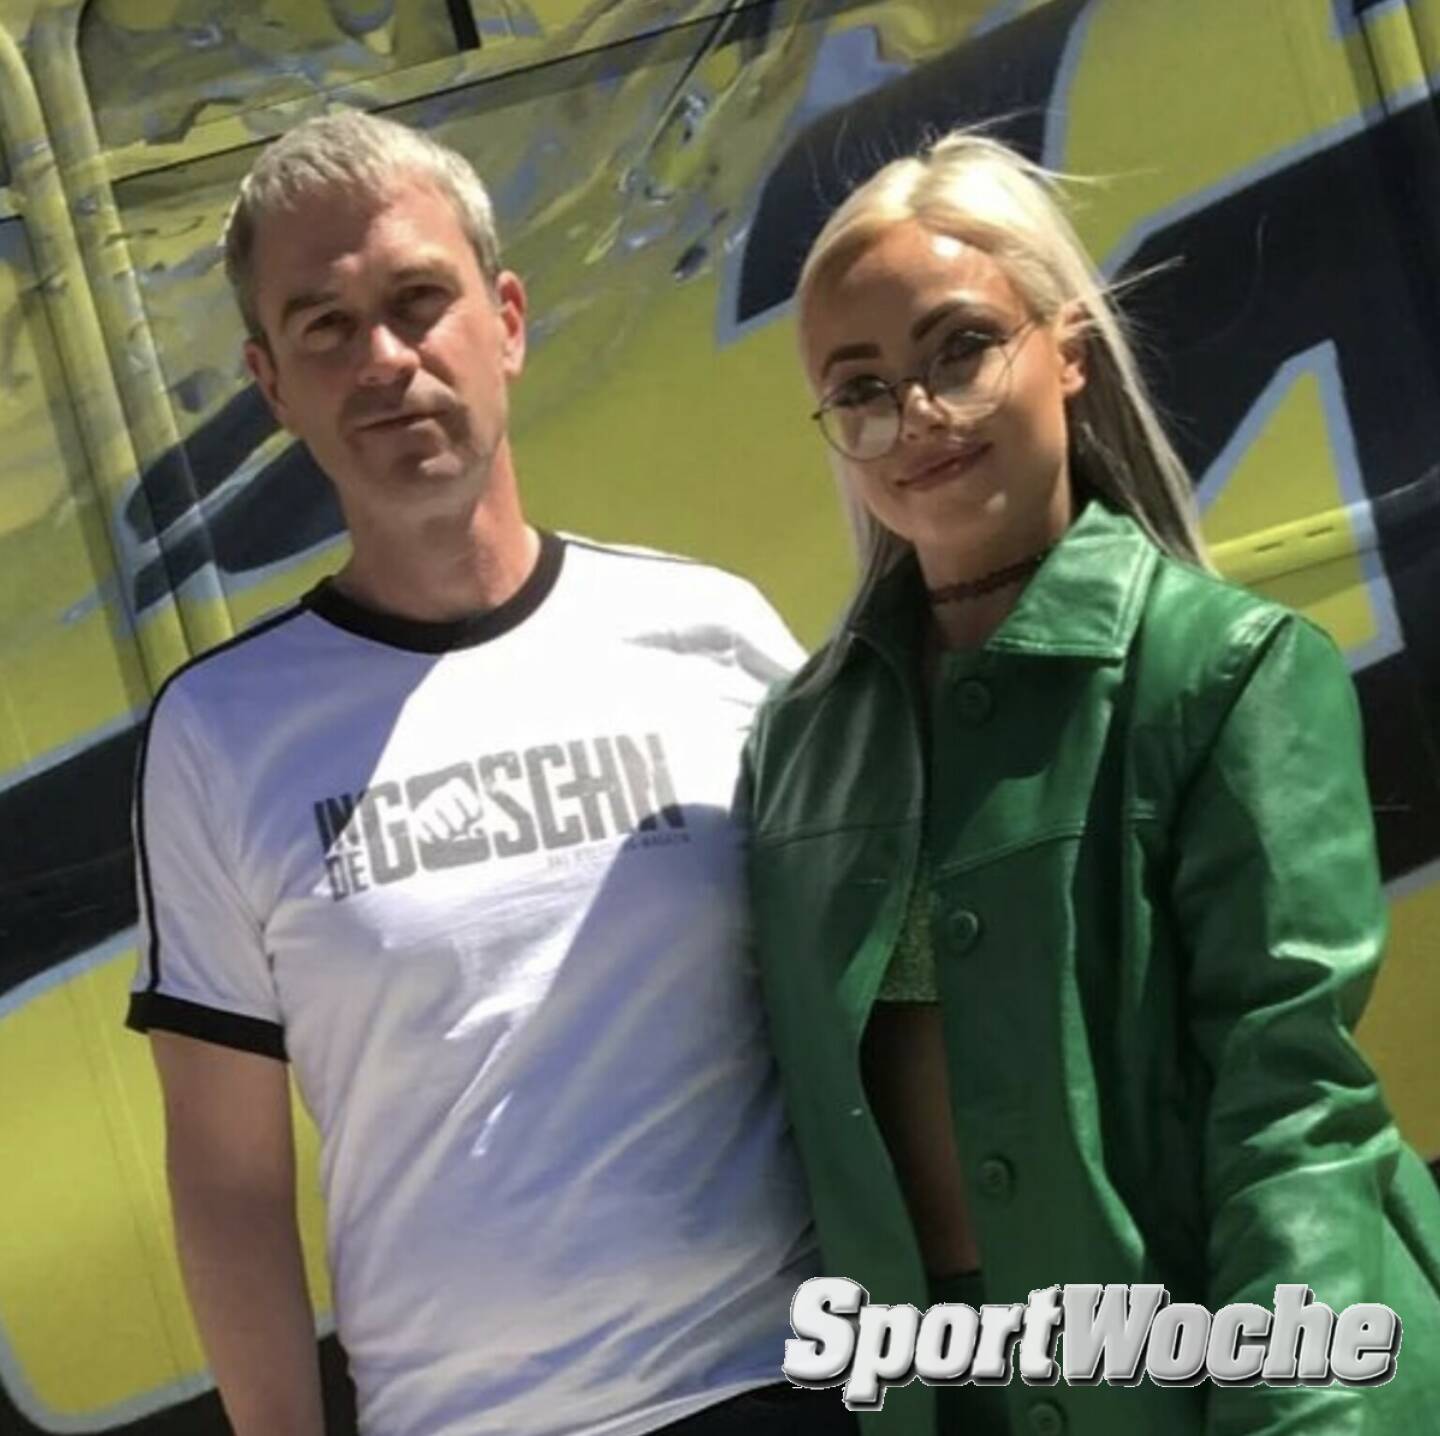 03.07.2022: IDG teams up with WWE-Superstar @yaonlylivvonce Liv Morgan #c4energy http://www.indegoschn.at http://www.sportgeschichte.at/sportwochepodcast 